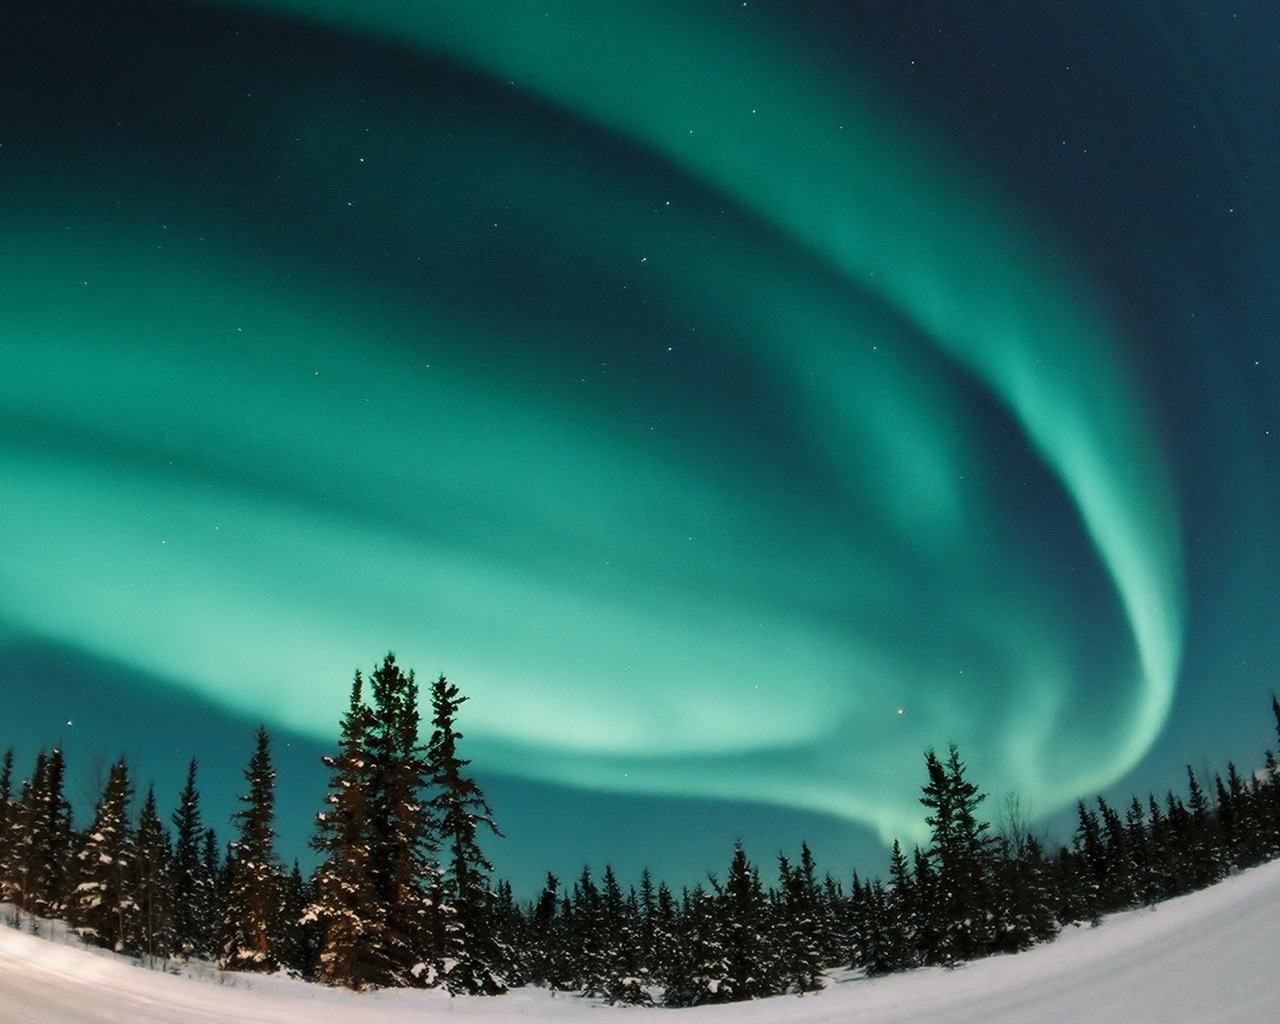 Natural wonders of the Northern Lights HD Wallpaper (1) #12 - 1280x1024